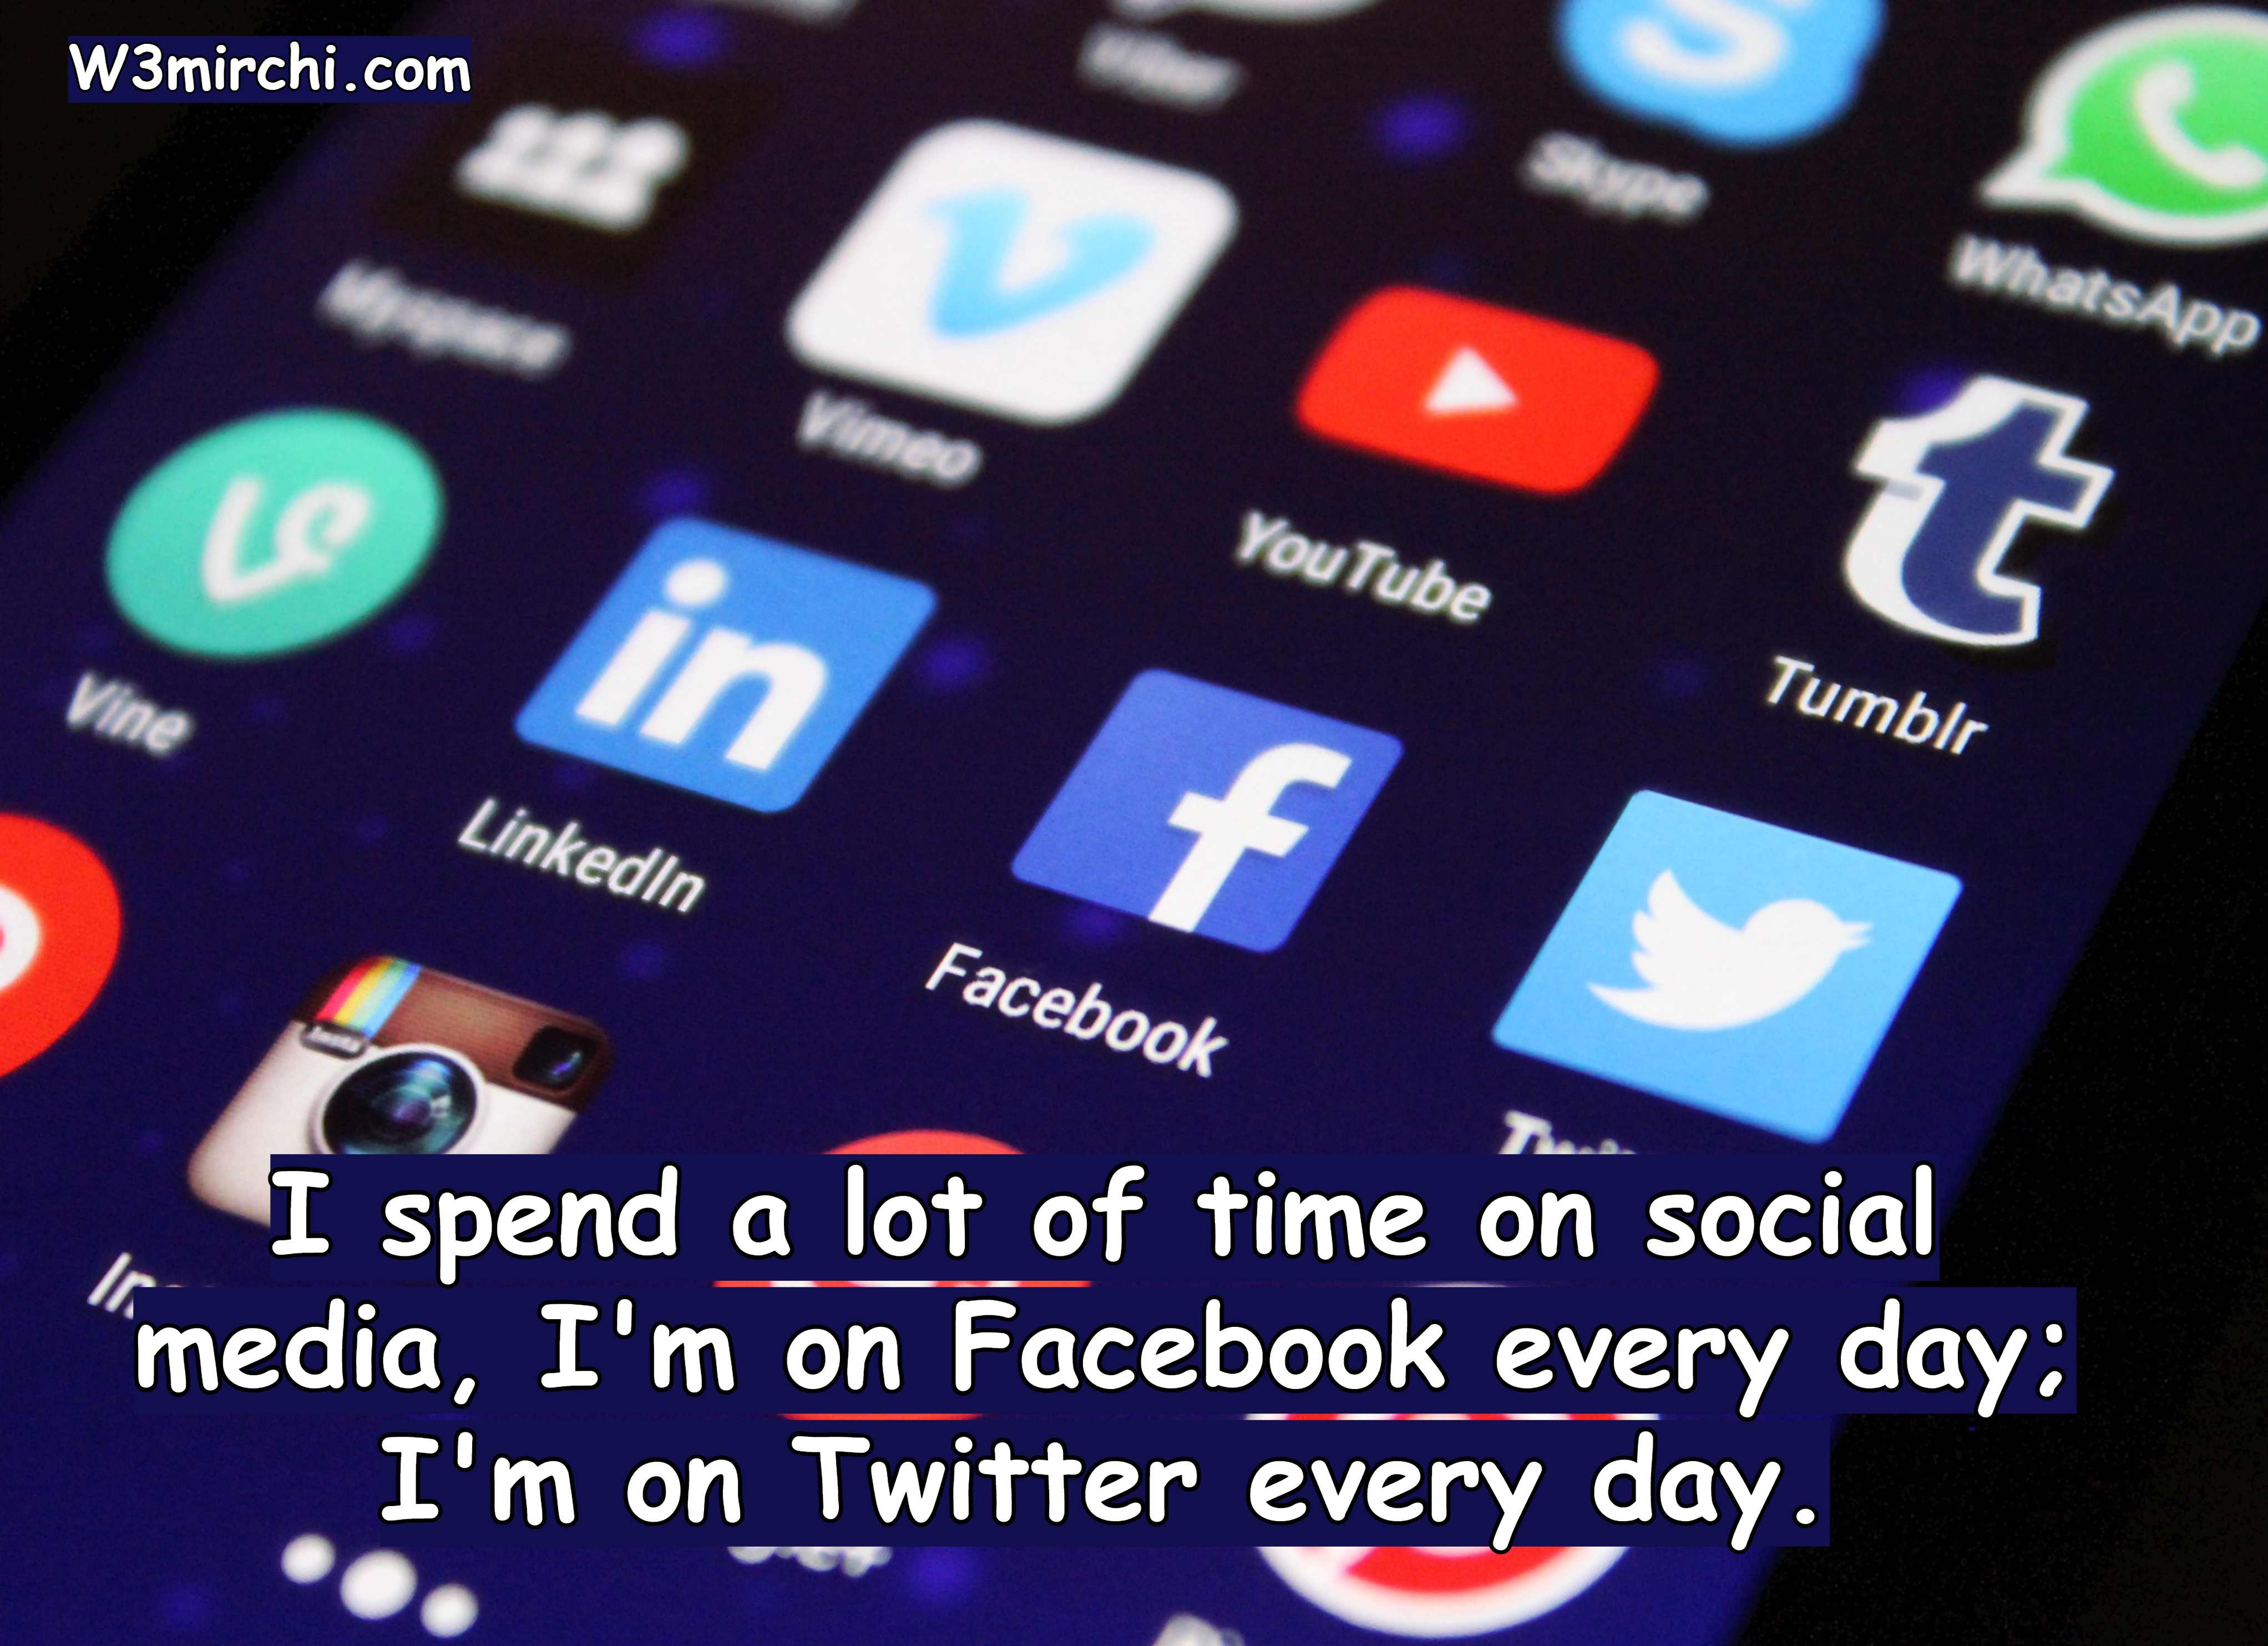 I spend a lot of time on social media,